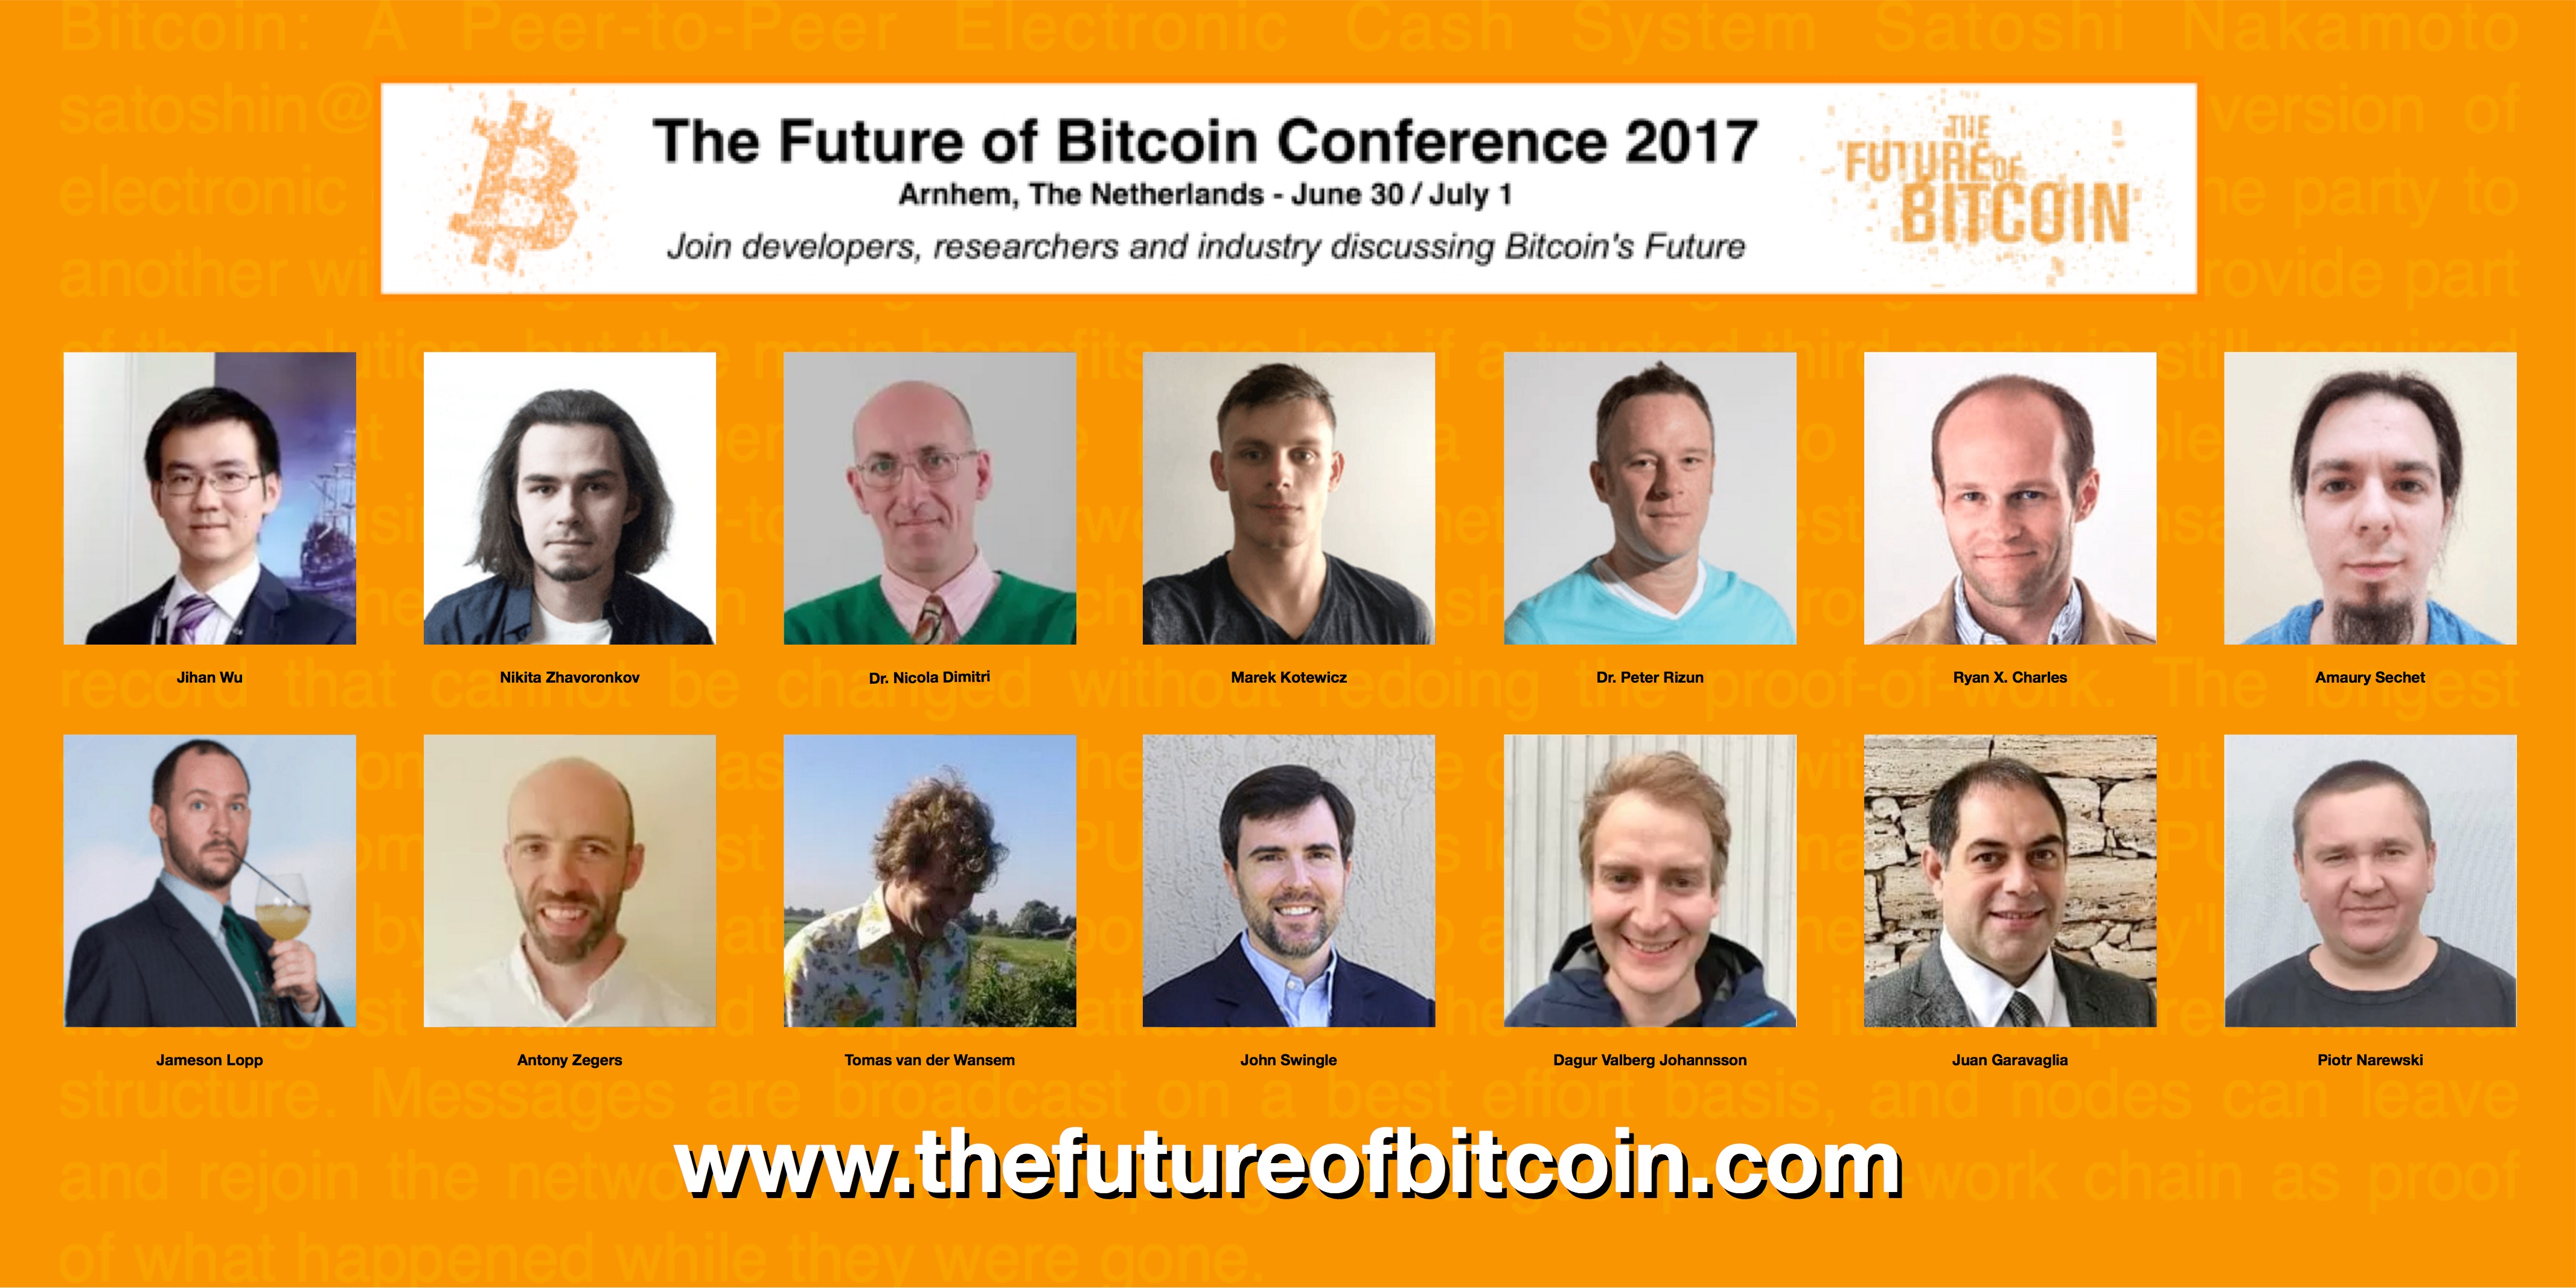 re of Bitcoin Conference 2017